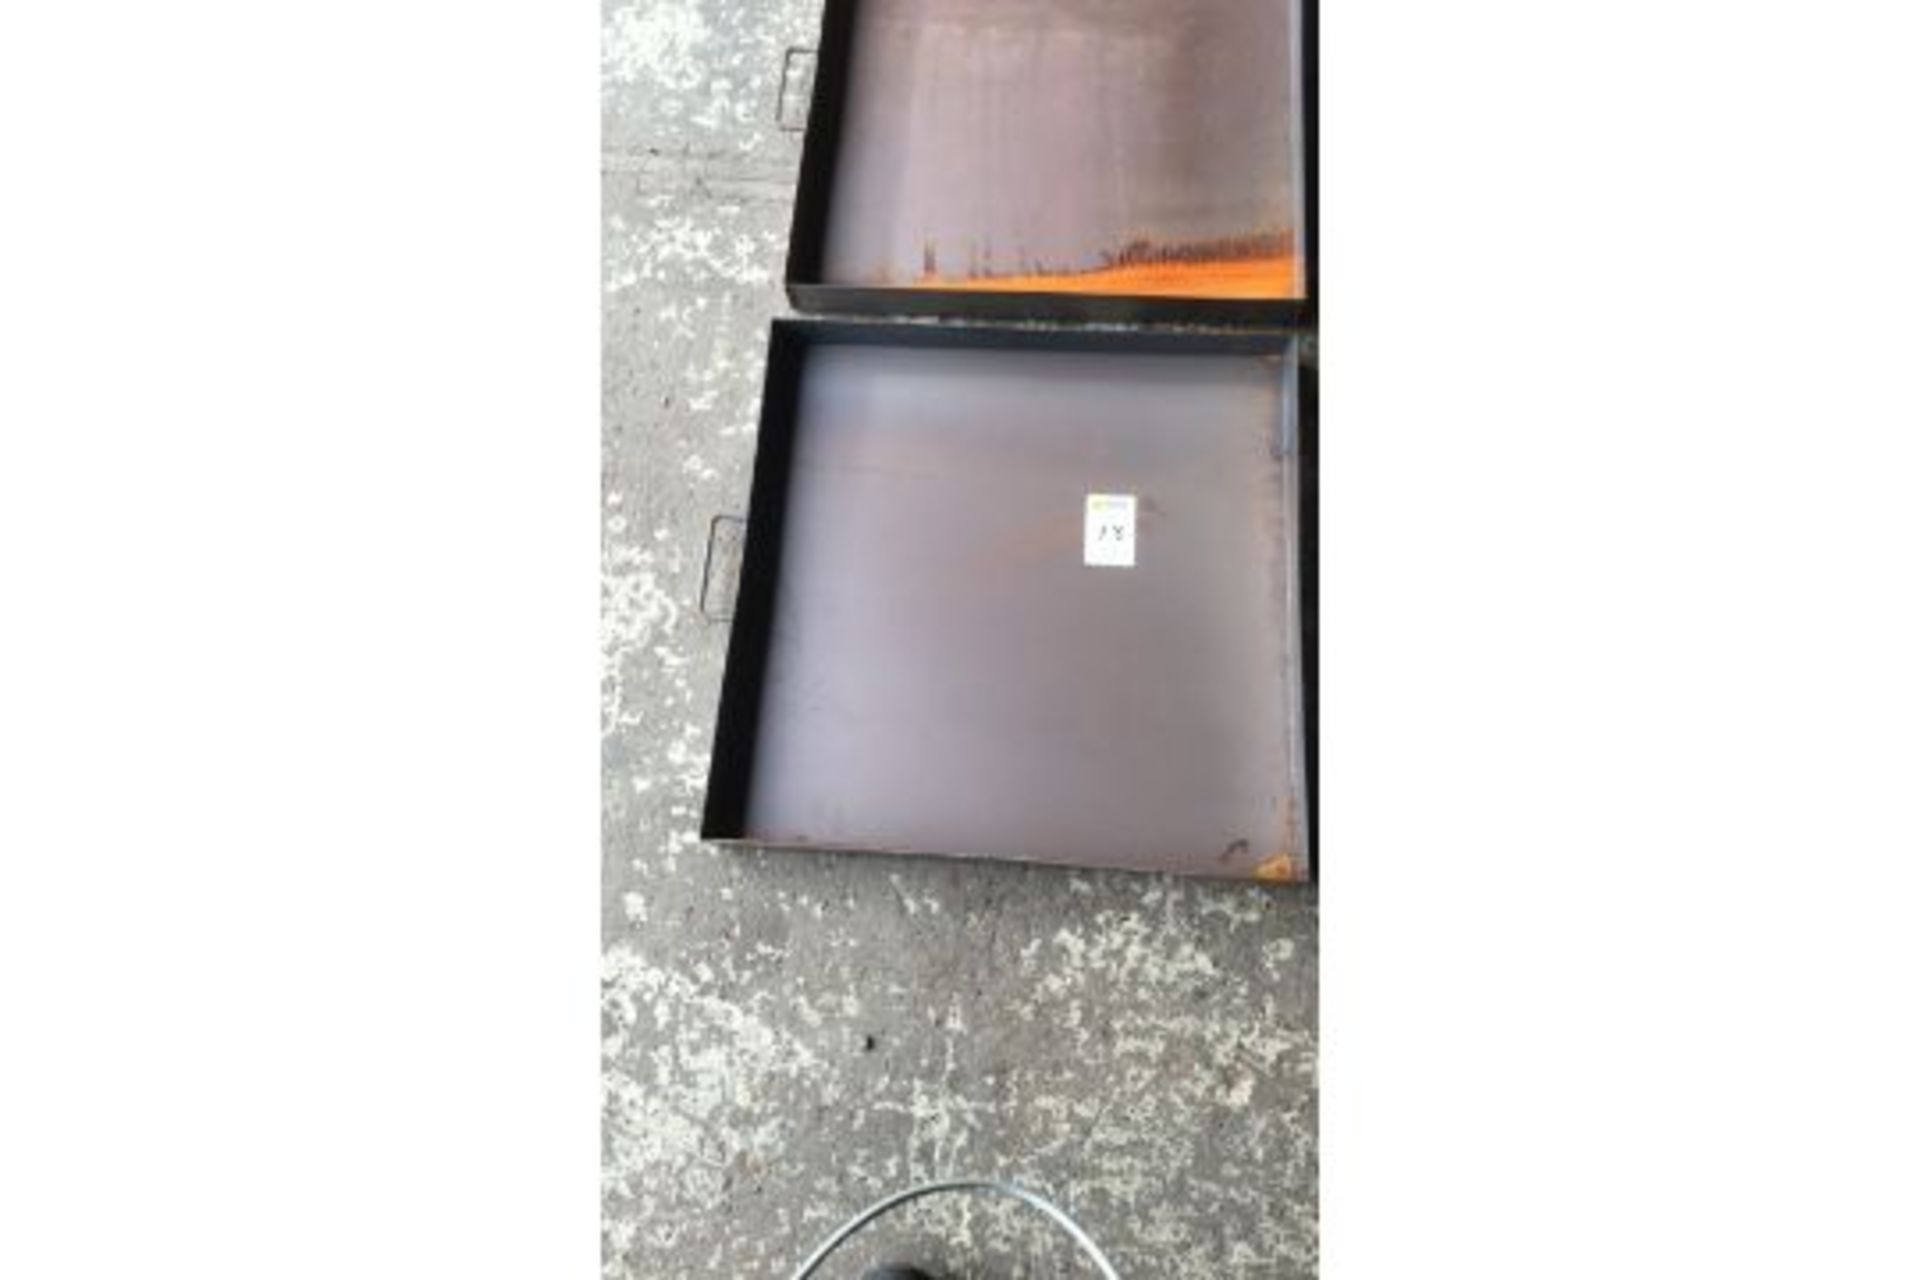 Steel 2ft x 2ft x 2 inch drip tray qty 4 - Image 2 of 2